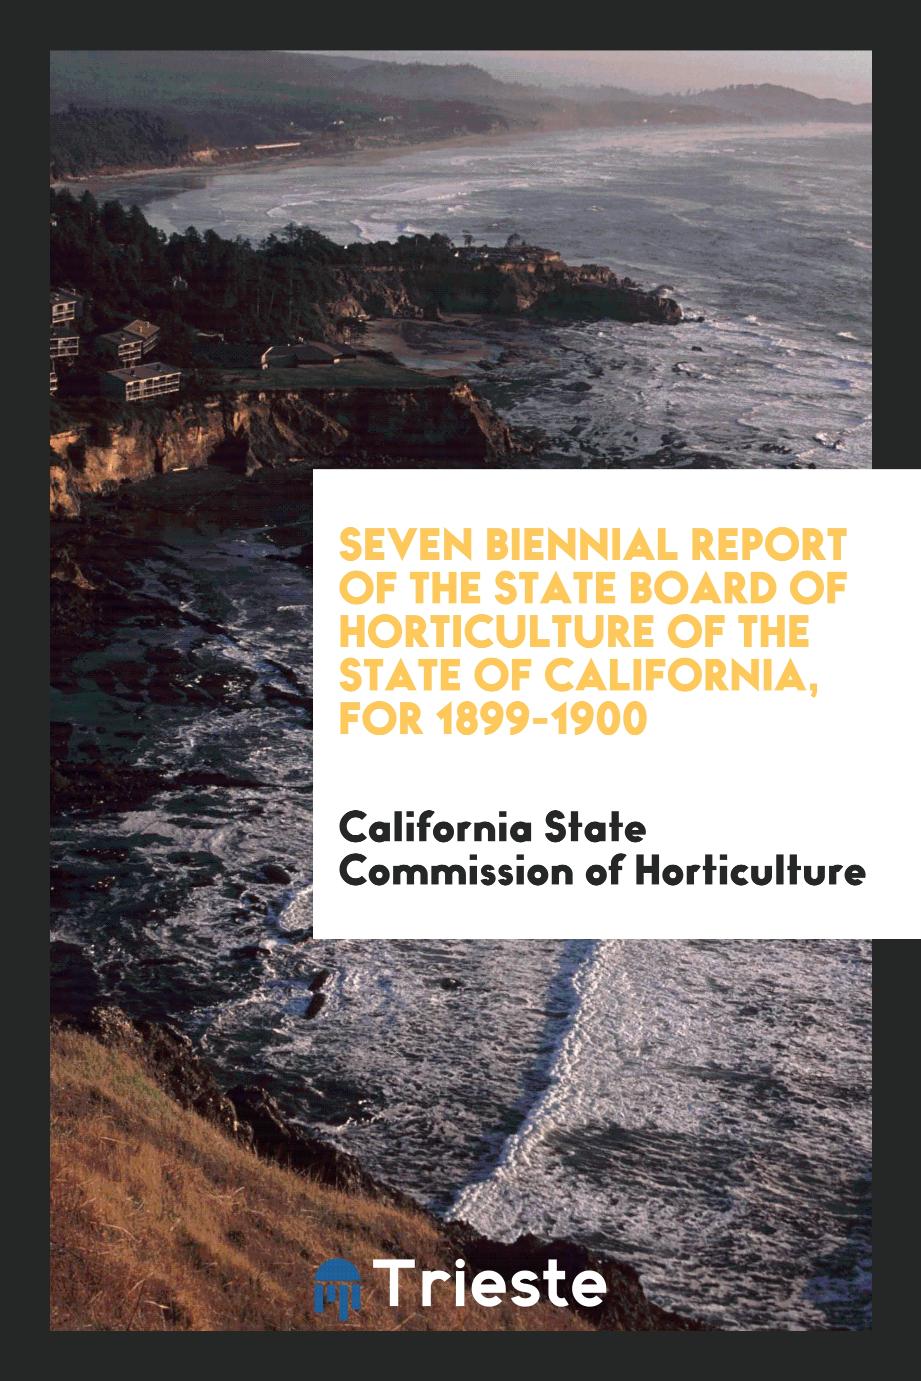 Seven Biennial Report of the State Board of Horticulture of the State of California, for 1899-1900